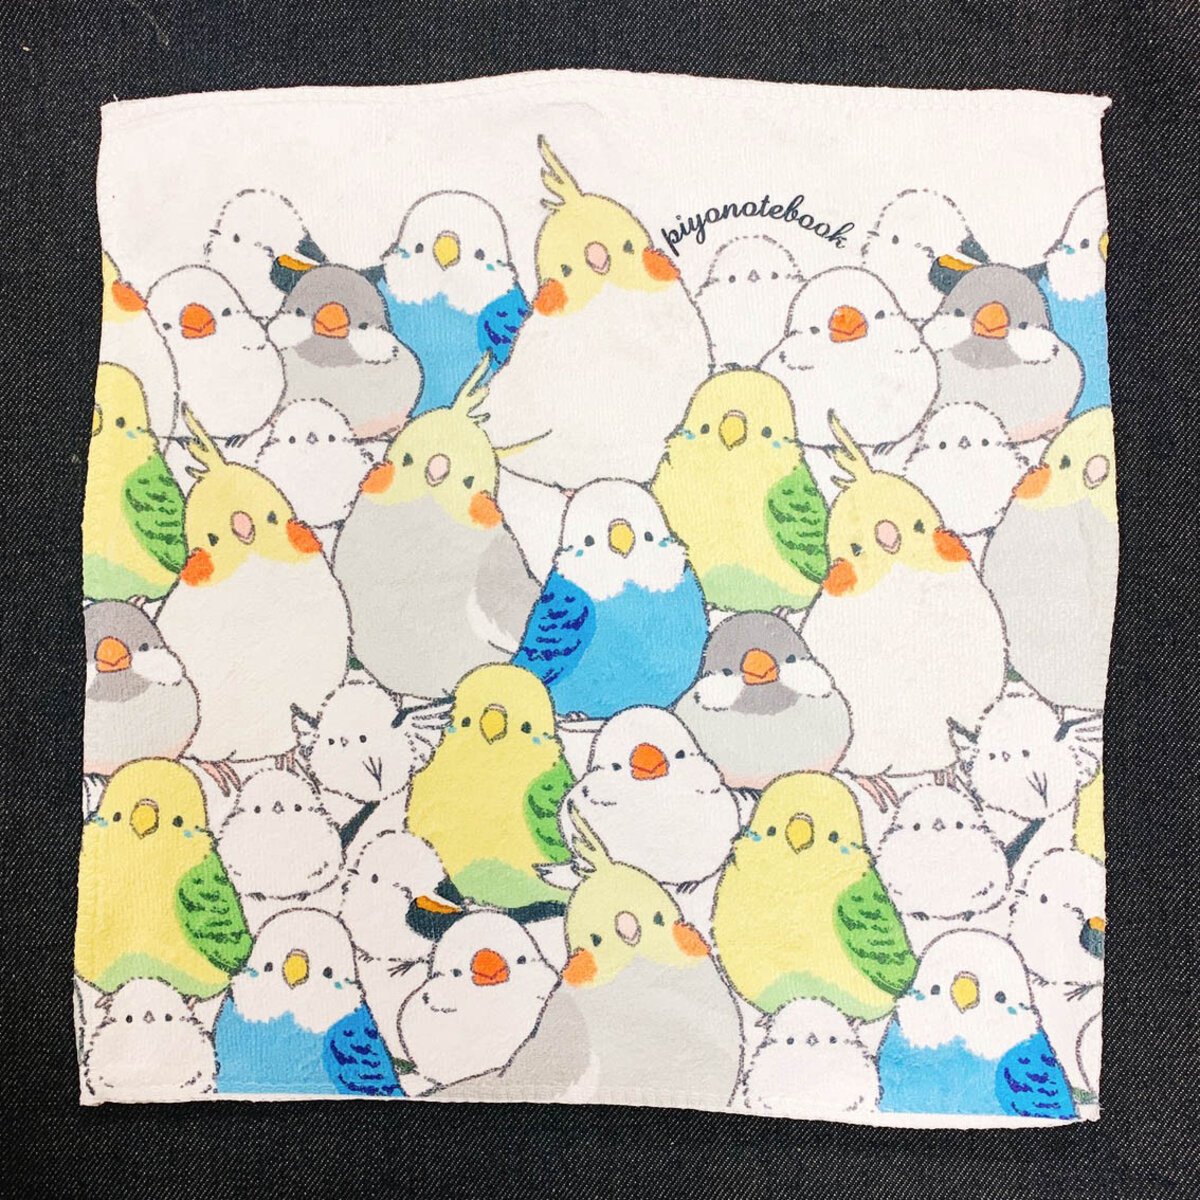 Budgie Cockatiel Java Sparrow Finch Long-tailed Tit Hand Towel Cloth